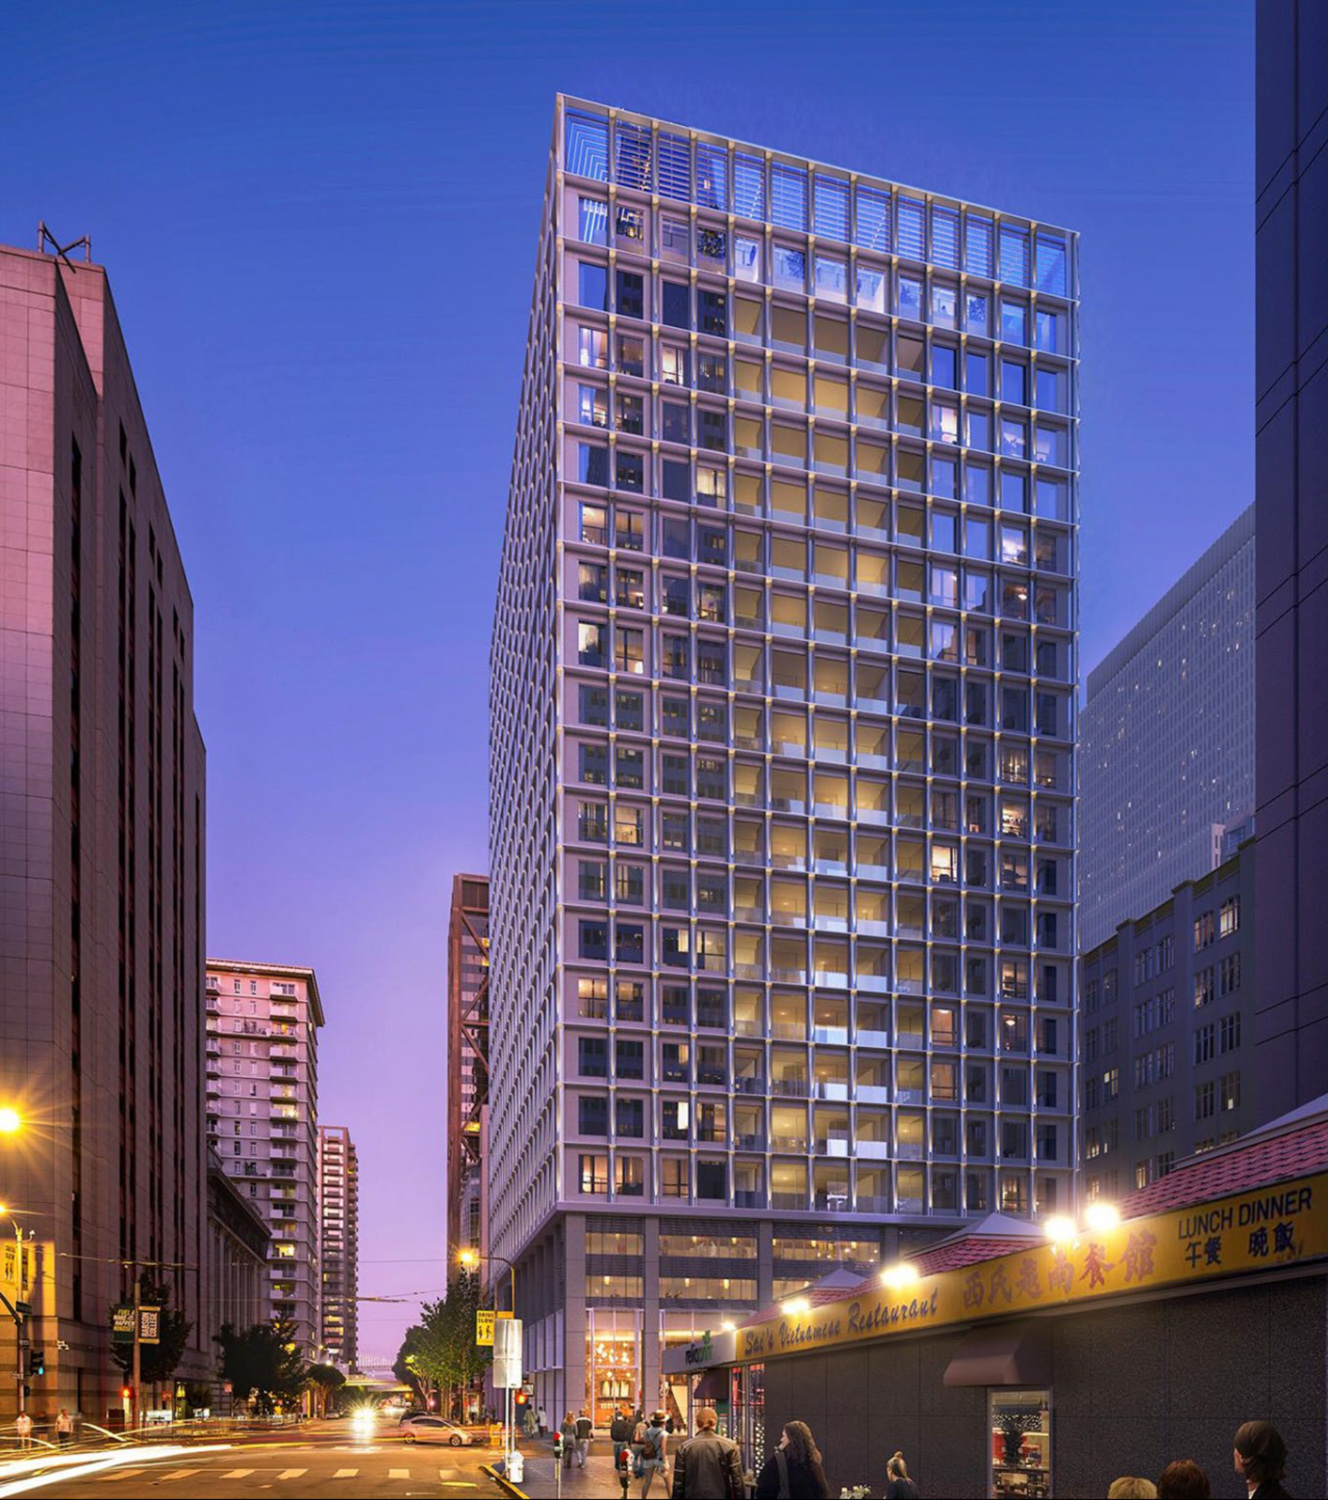 530 Sansome Street residential variant from Washington Street, rendering by Skidmore Owings & Merrill